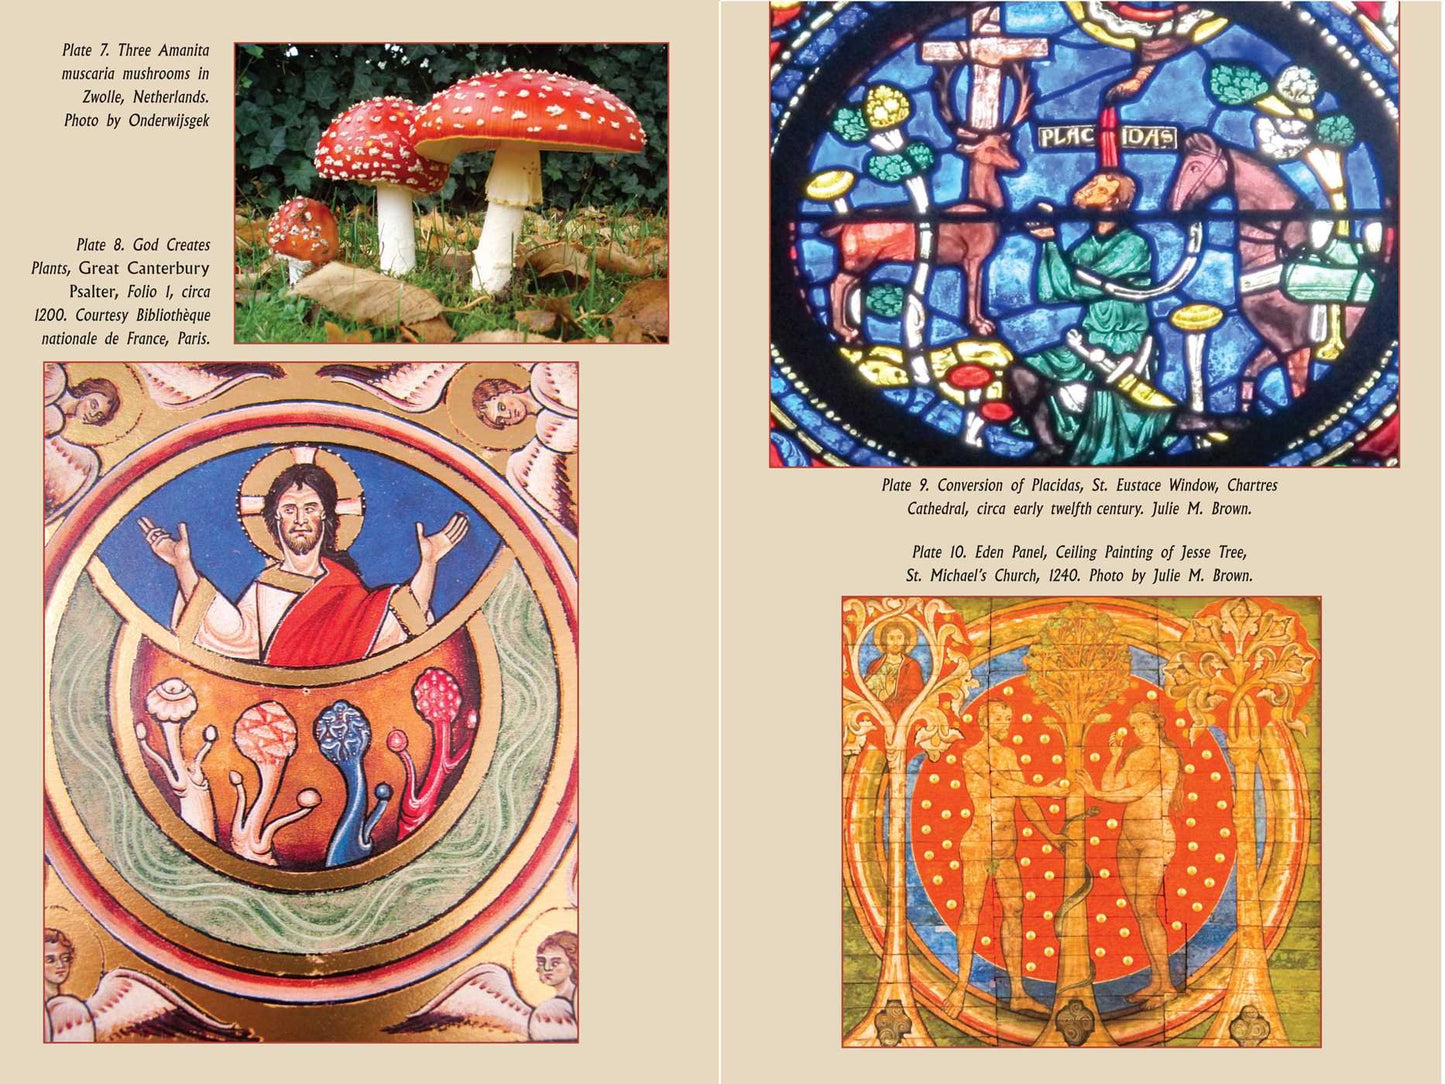 The Psychedelic Gospels: by Jerry B. Brown Ph.D. Julie M. Brown M.A.